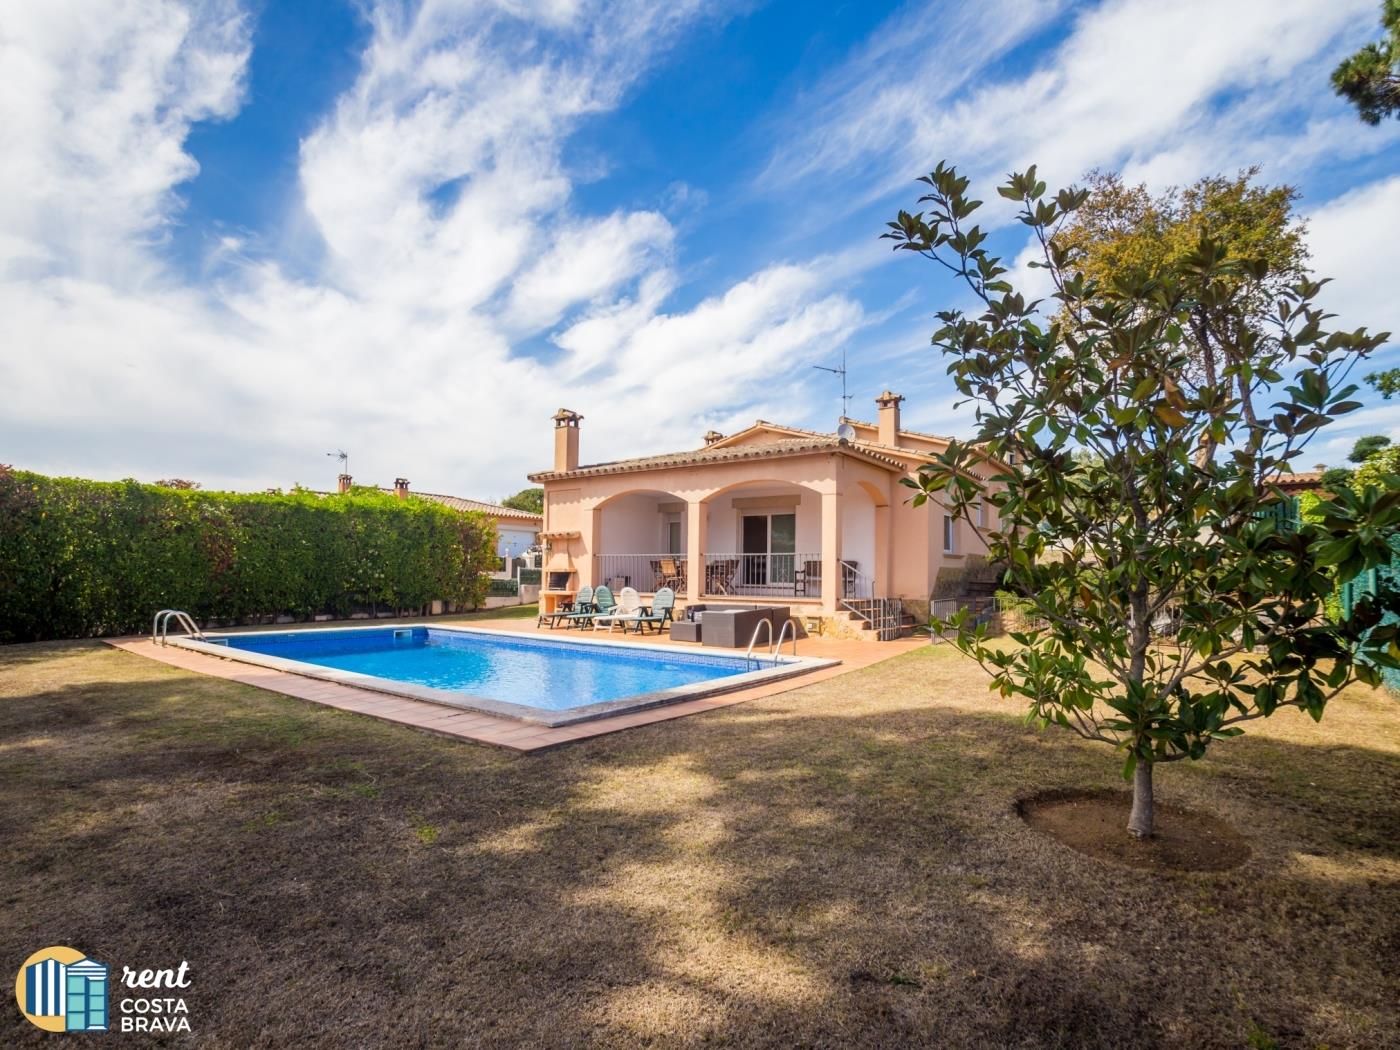 Casa Margarita with private swimming pool and parking space in Calonge